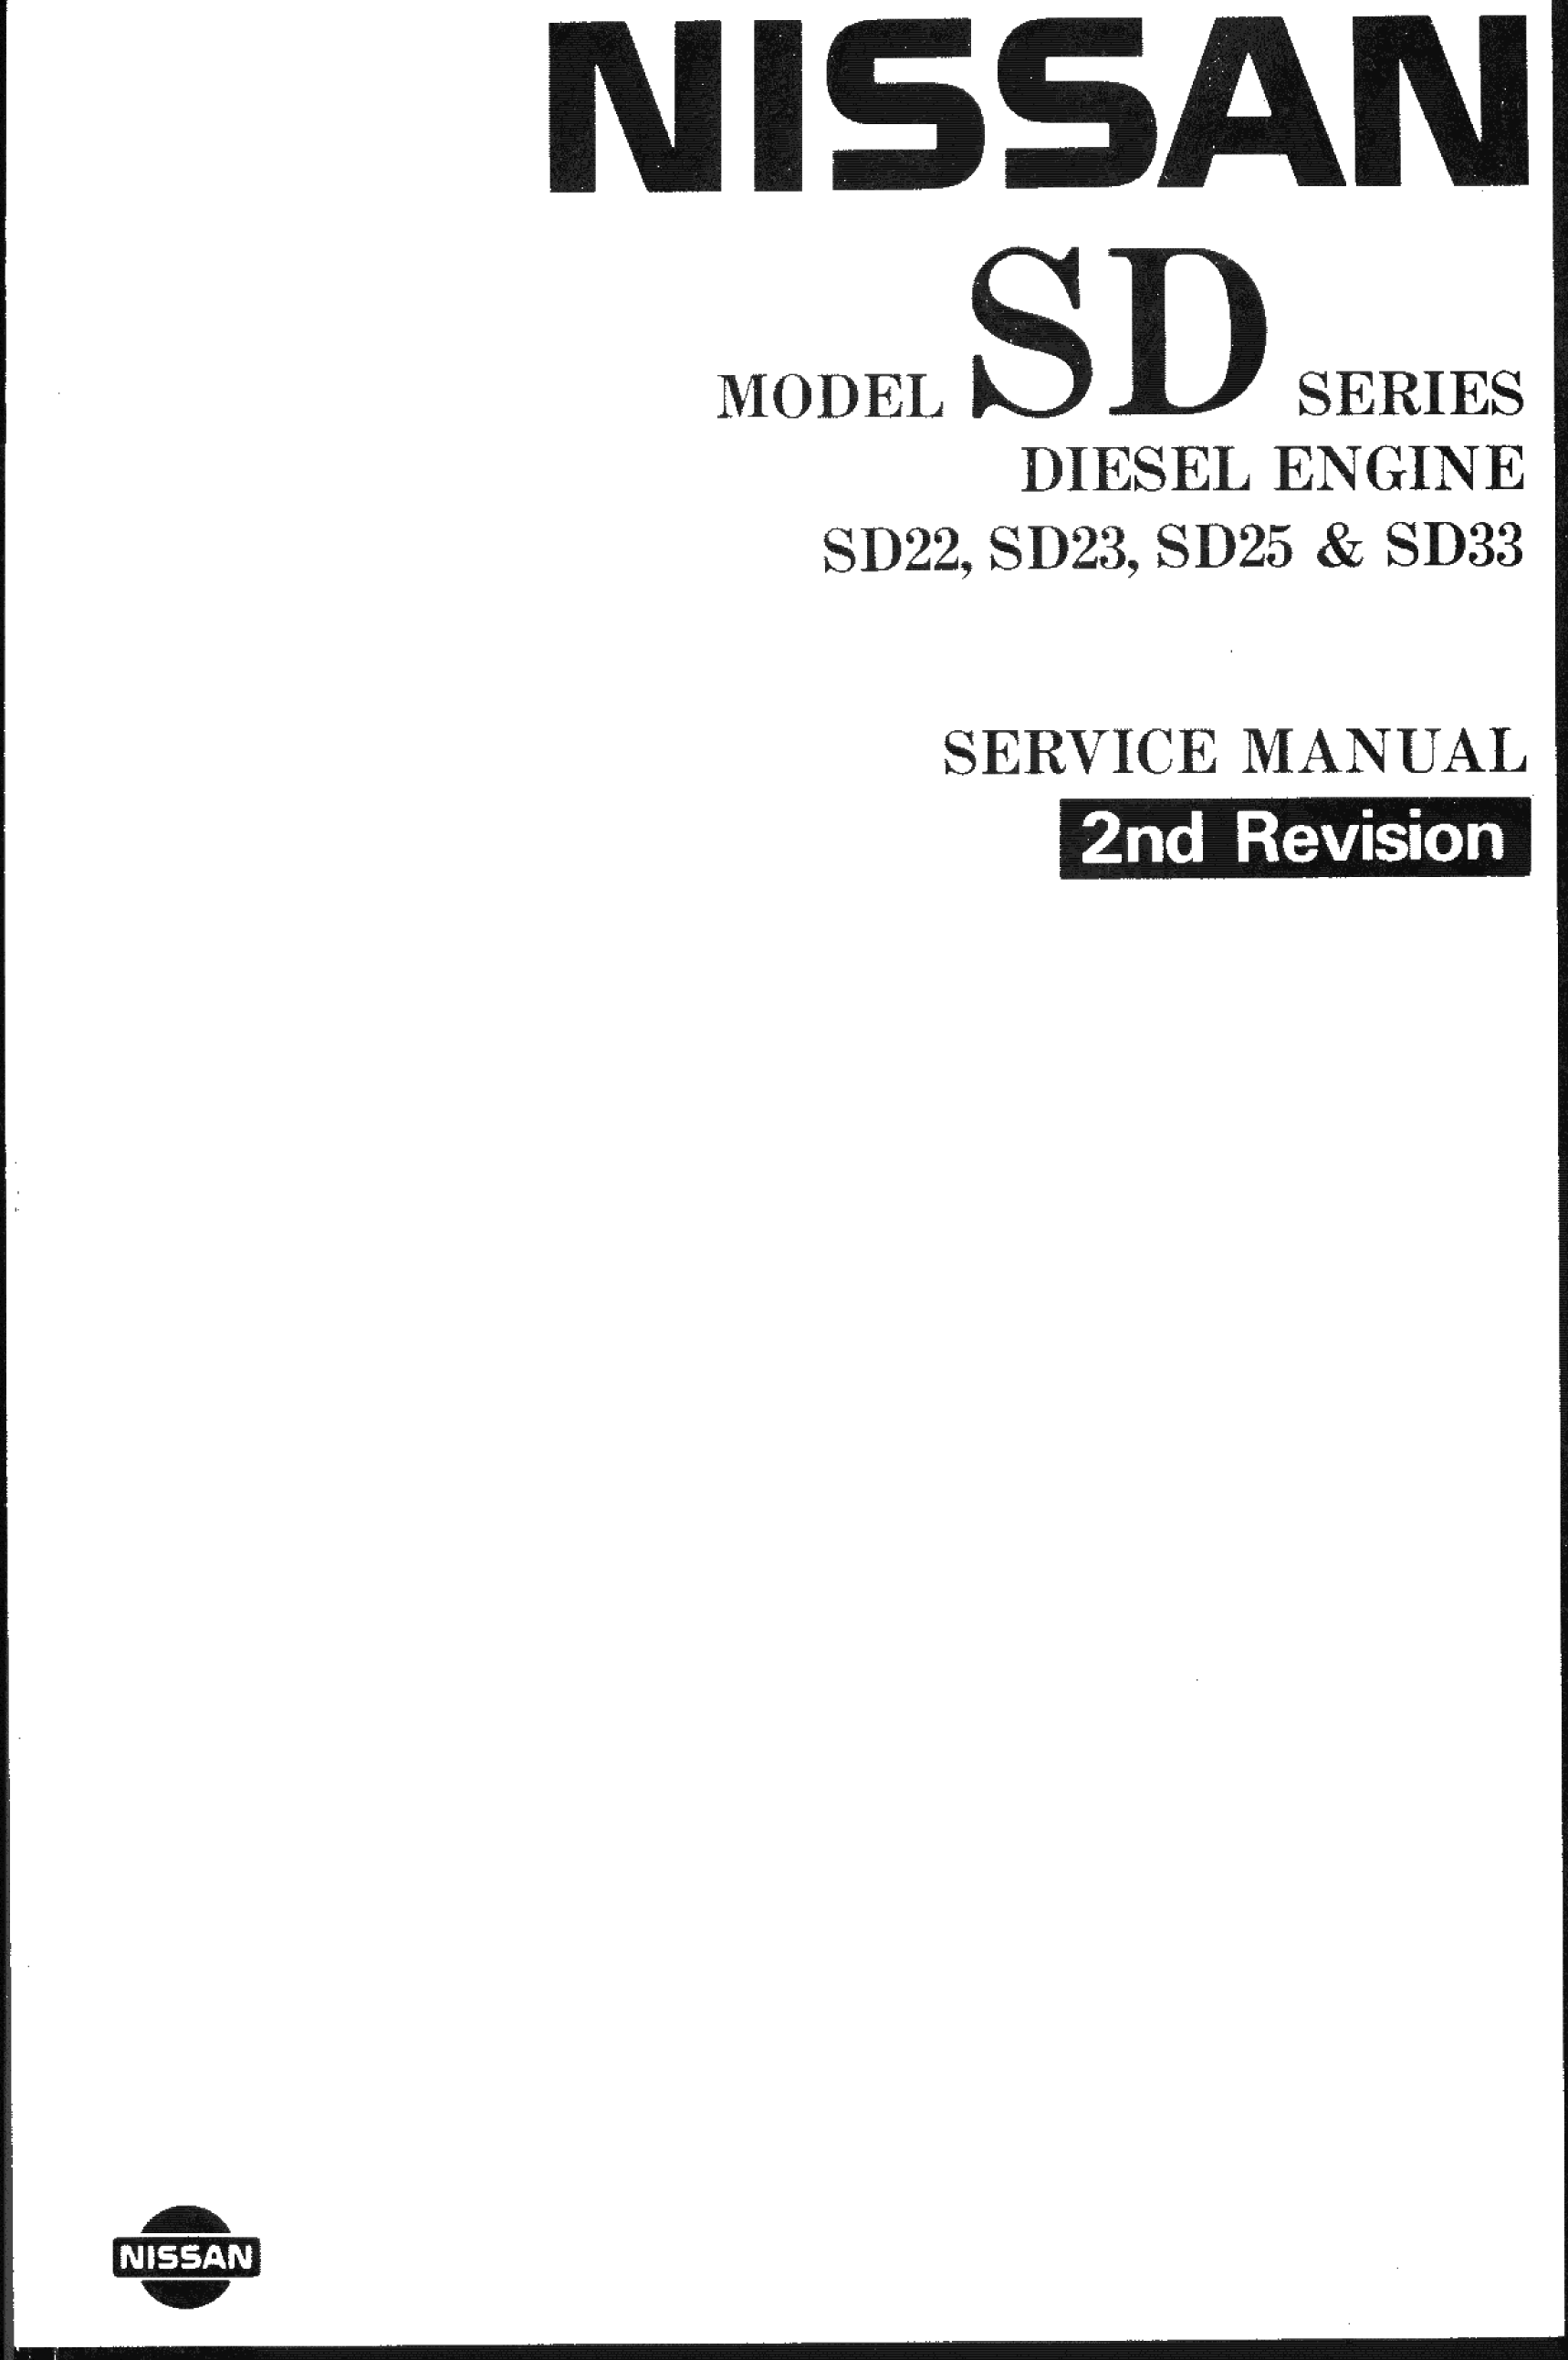  Nissan  Diesel  Sd22  Sd23  Sd25  Sd33  Workshop  Manual manual page 1